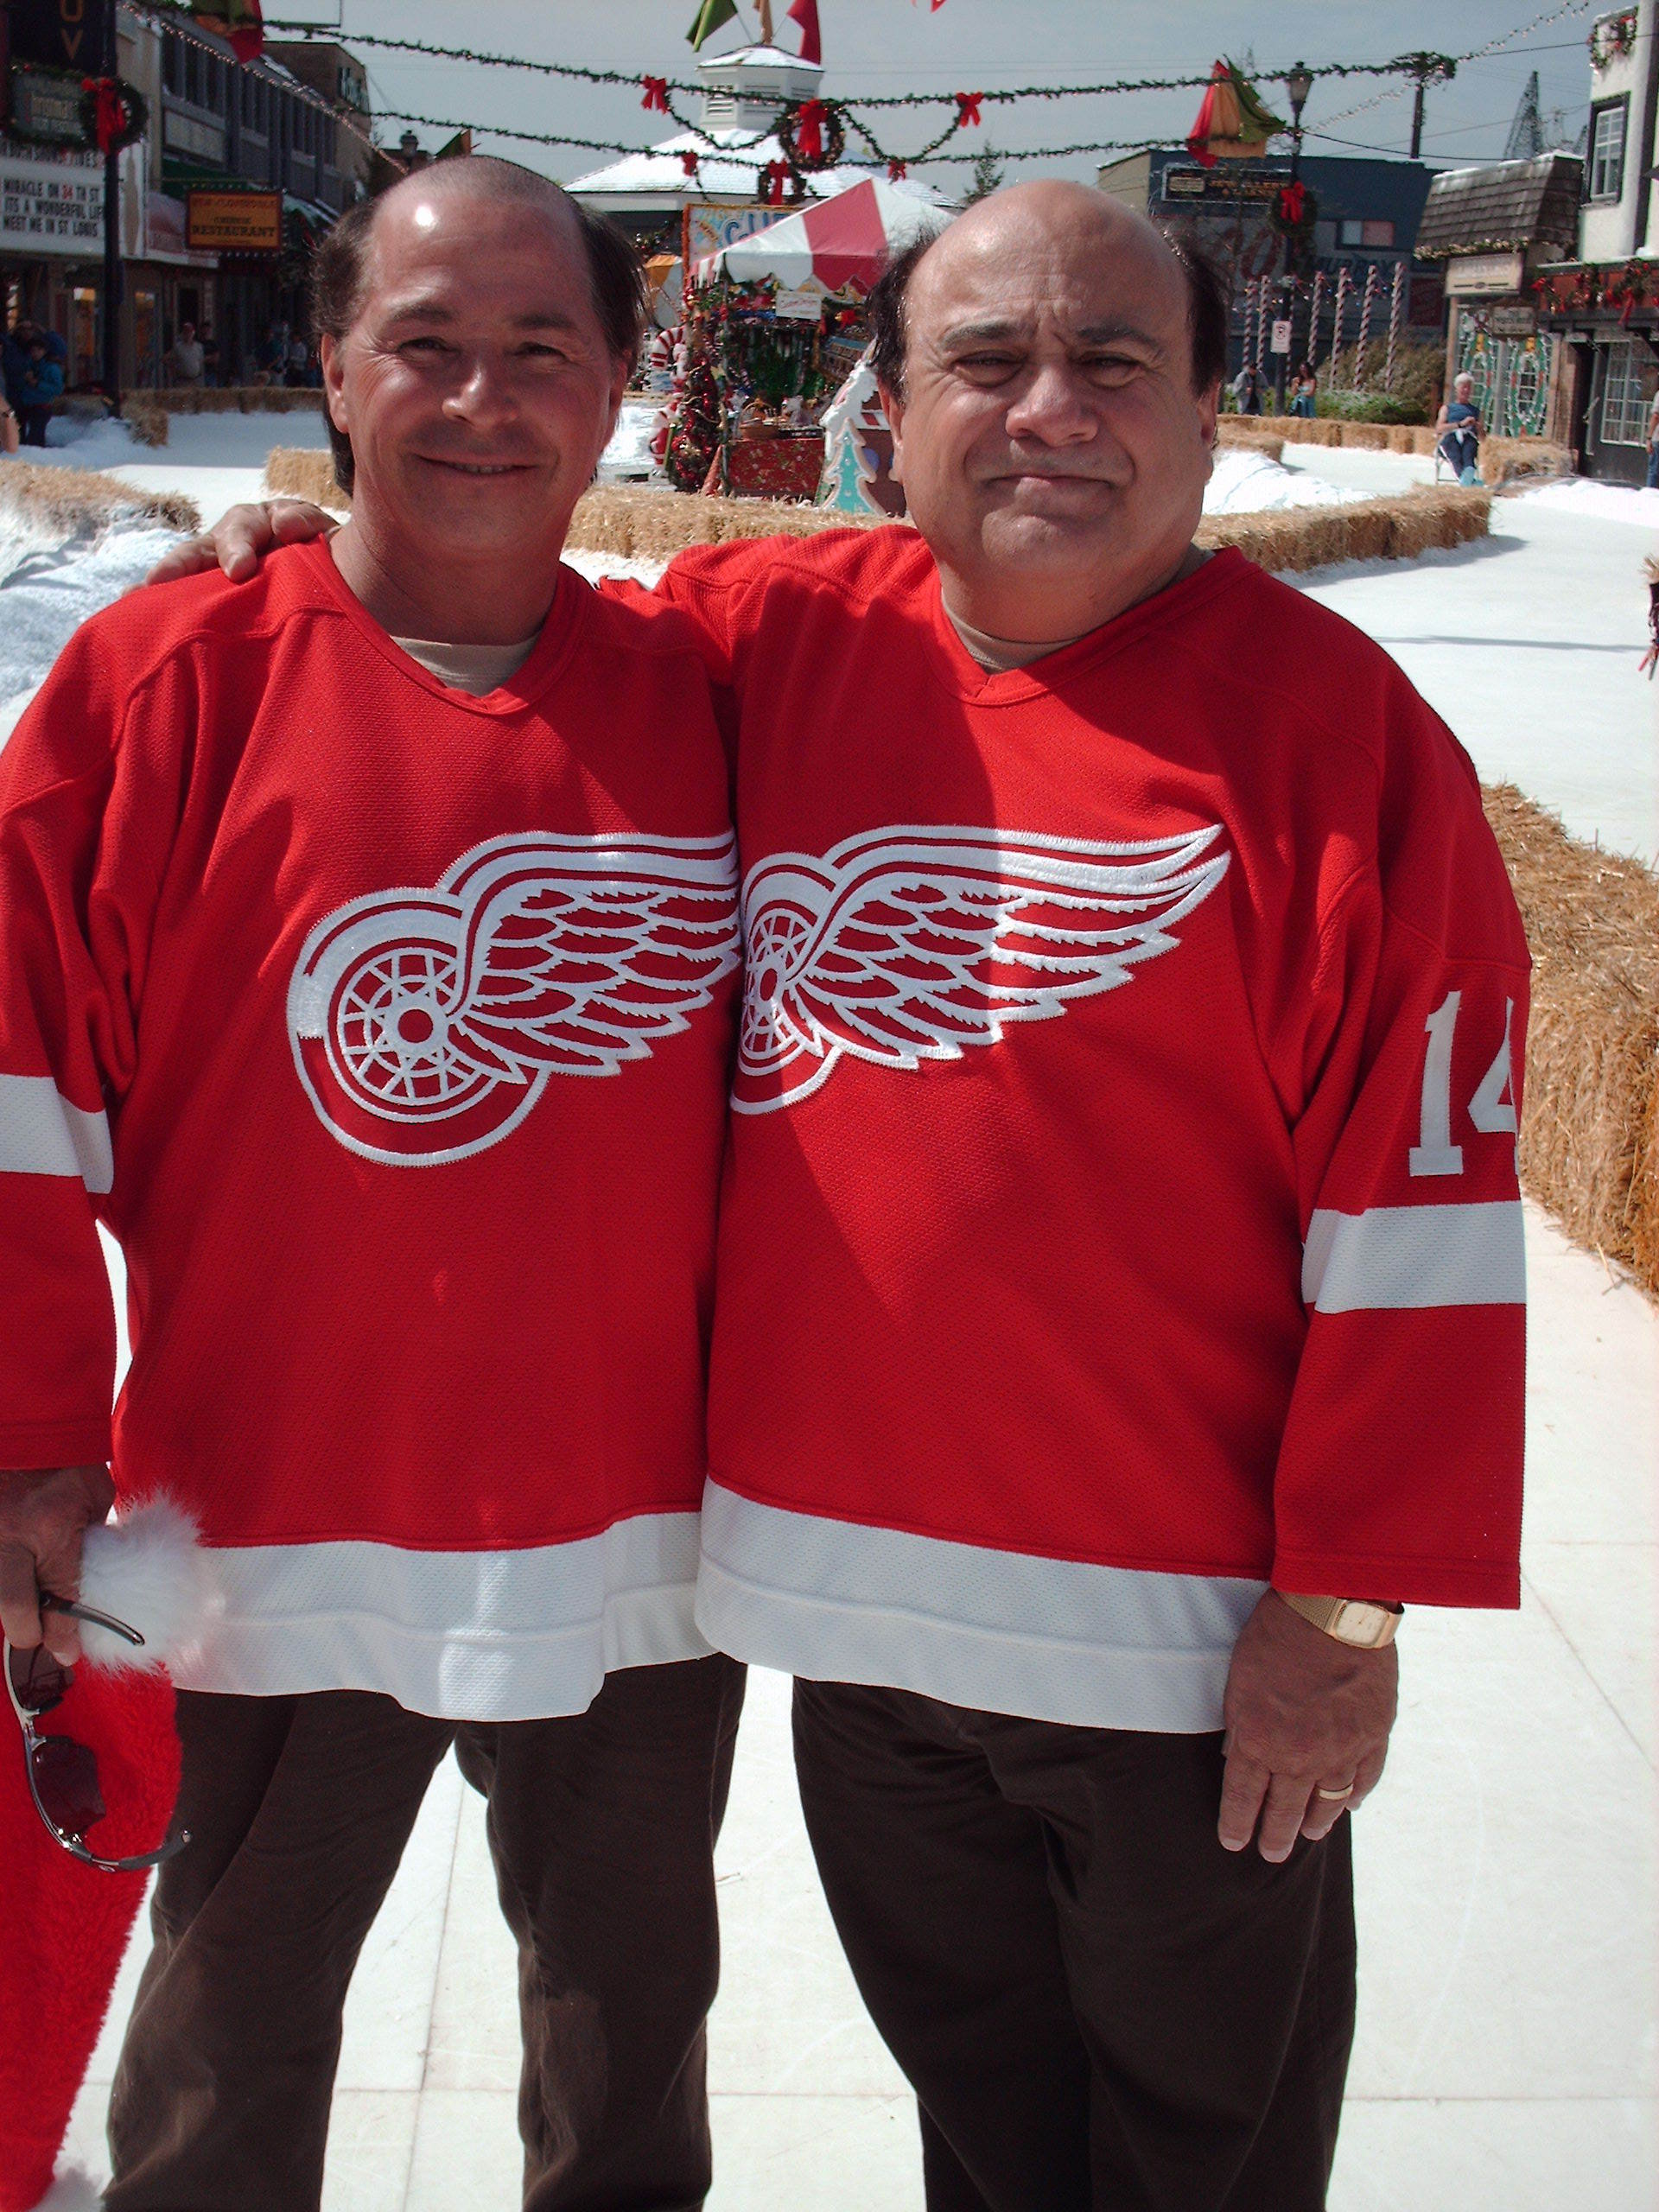 Danny DeVito and Michael Munoz as Danny's stunt double for Deck the Halls